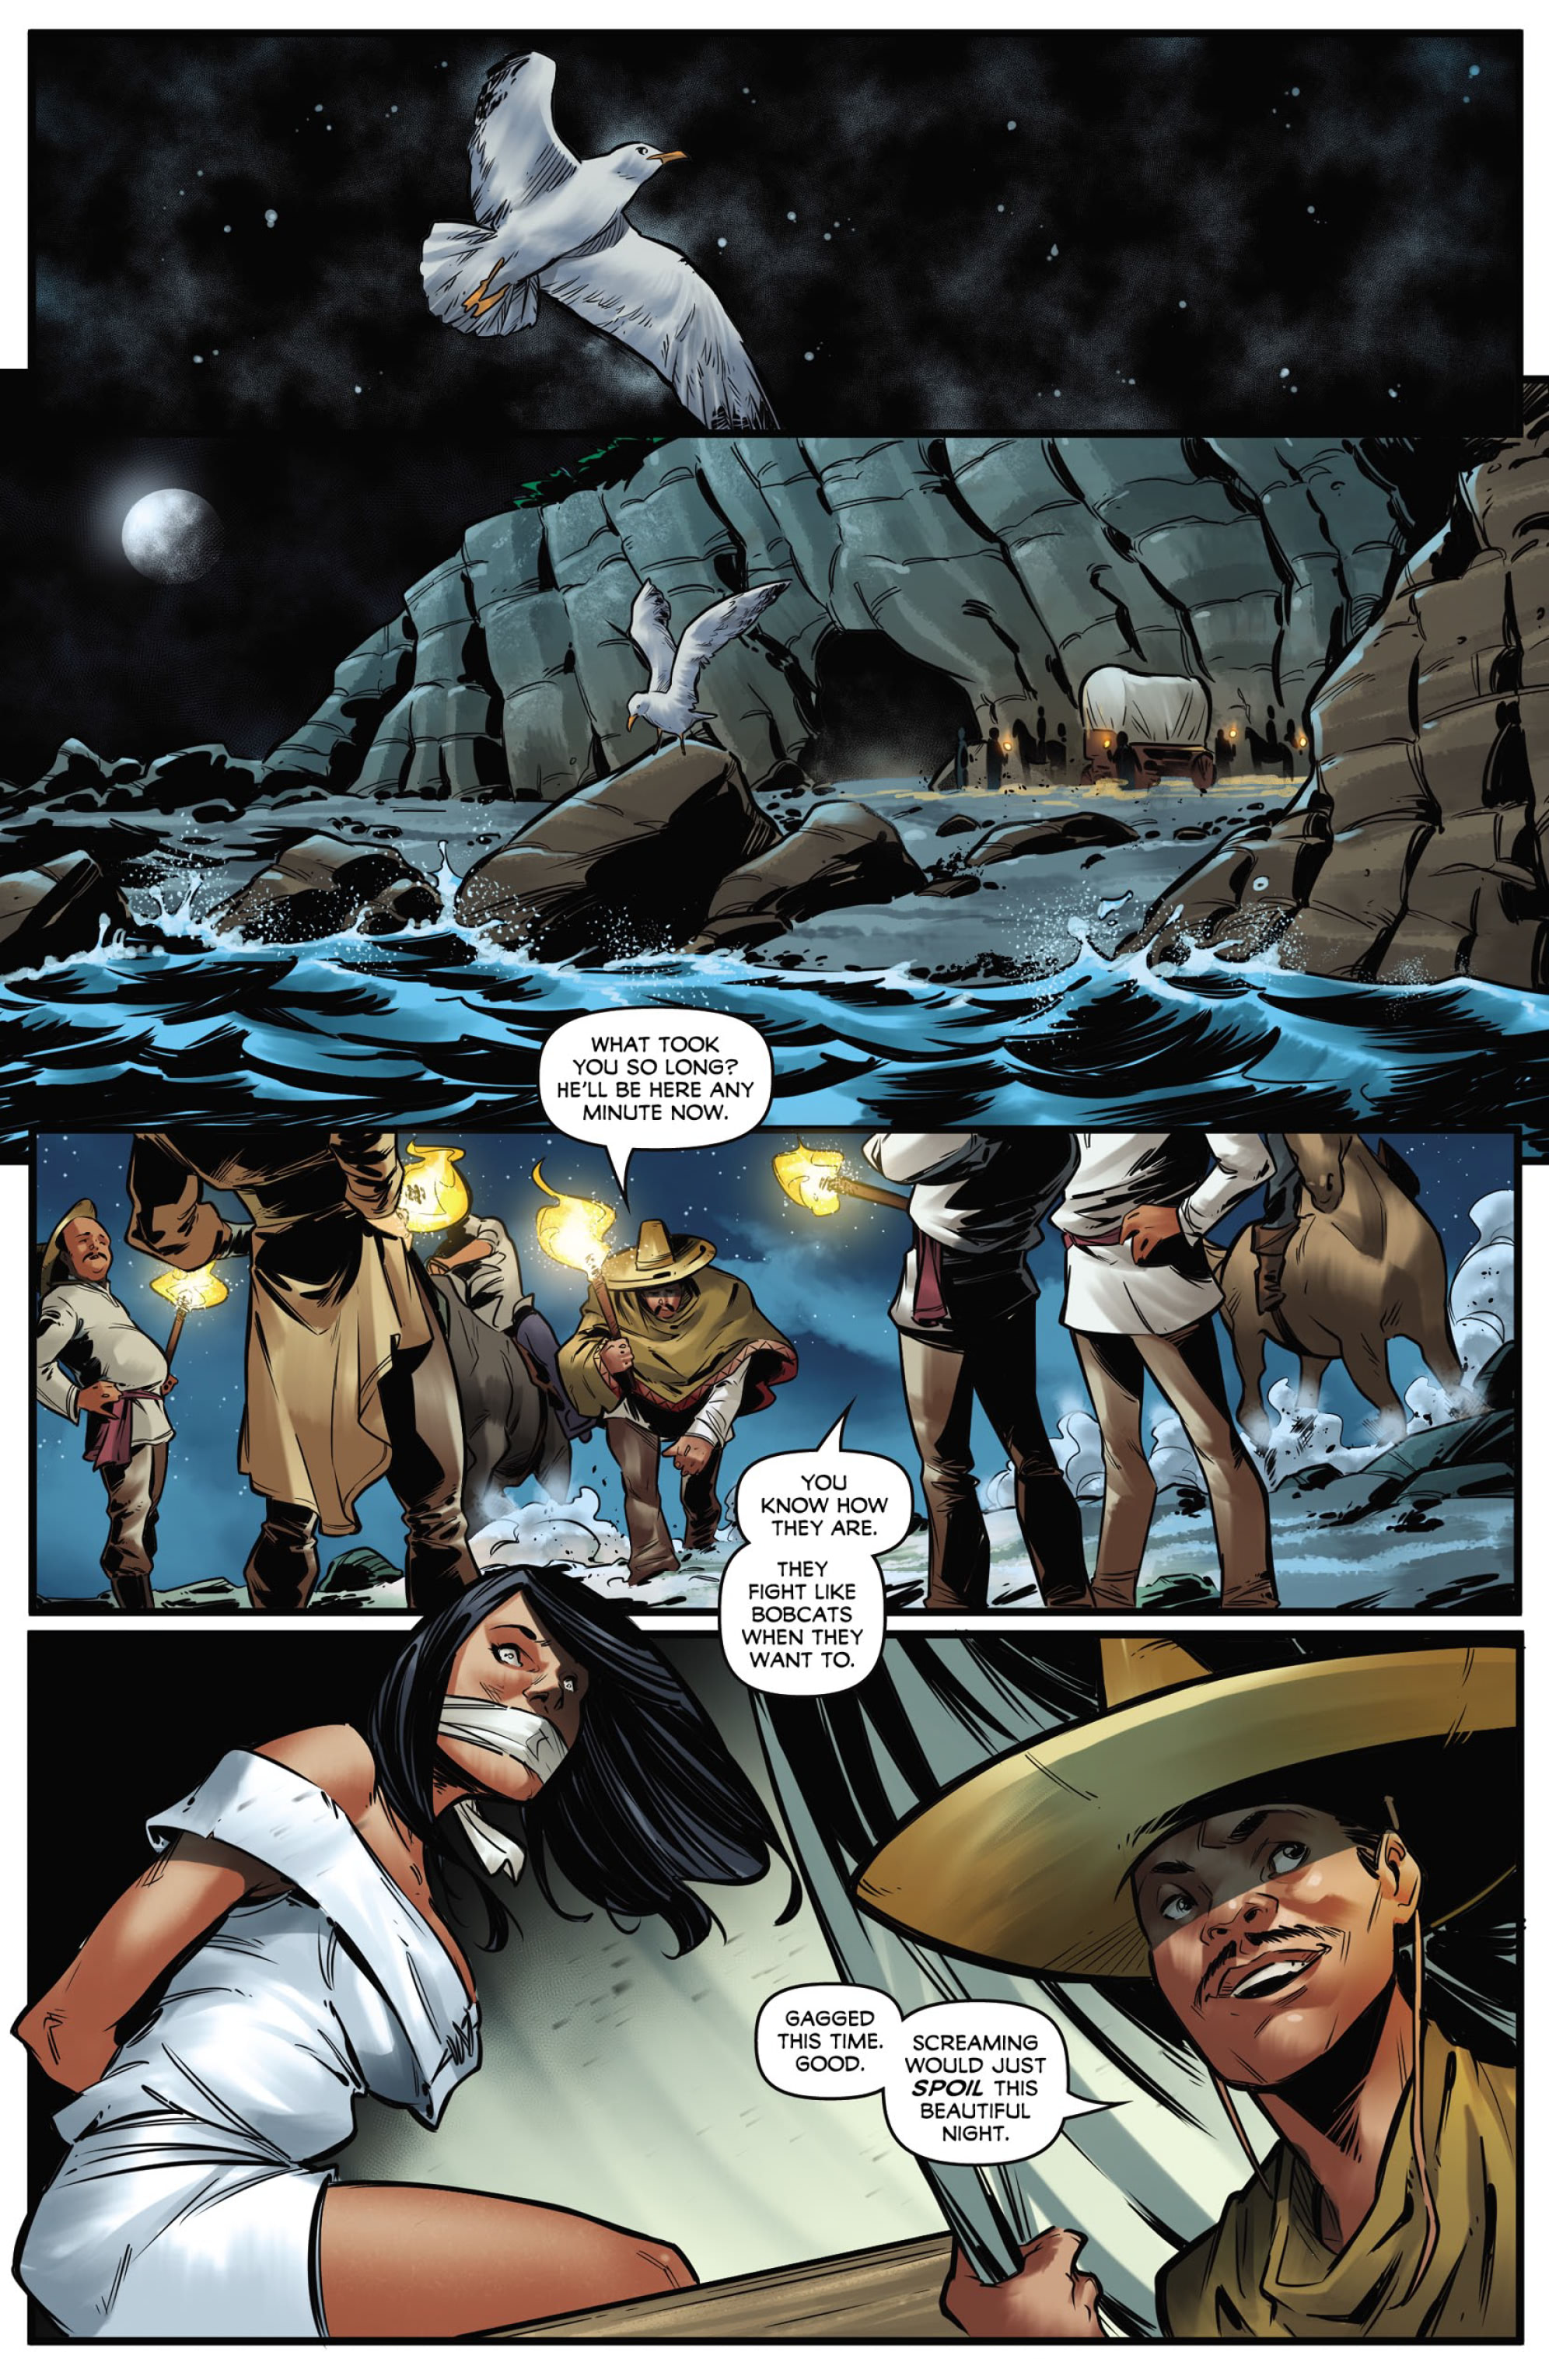 Zorro: Galleon Of the Dead (2020-): Chapter 1 - Page 4